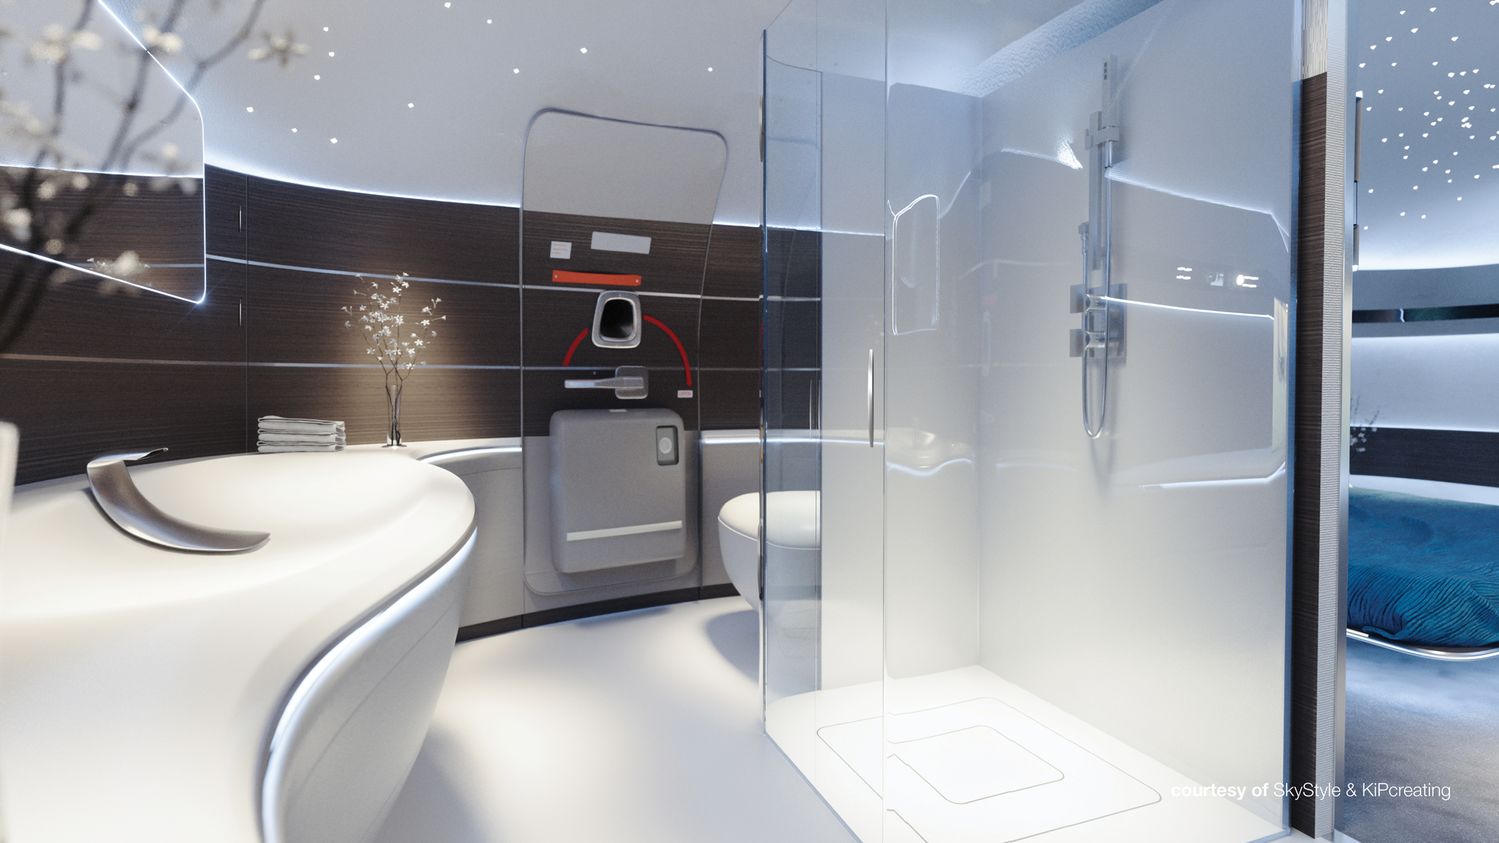 And of course, it comes with this stunning ensuite bathroom.